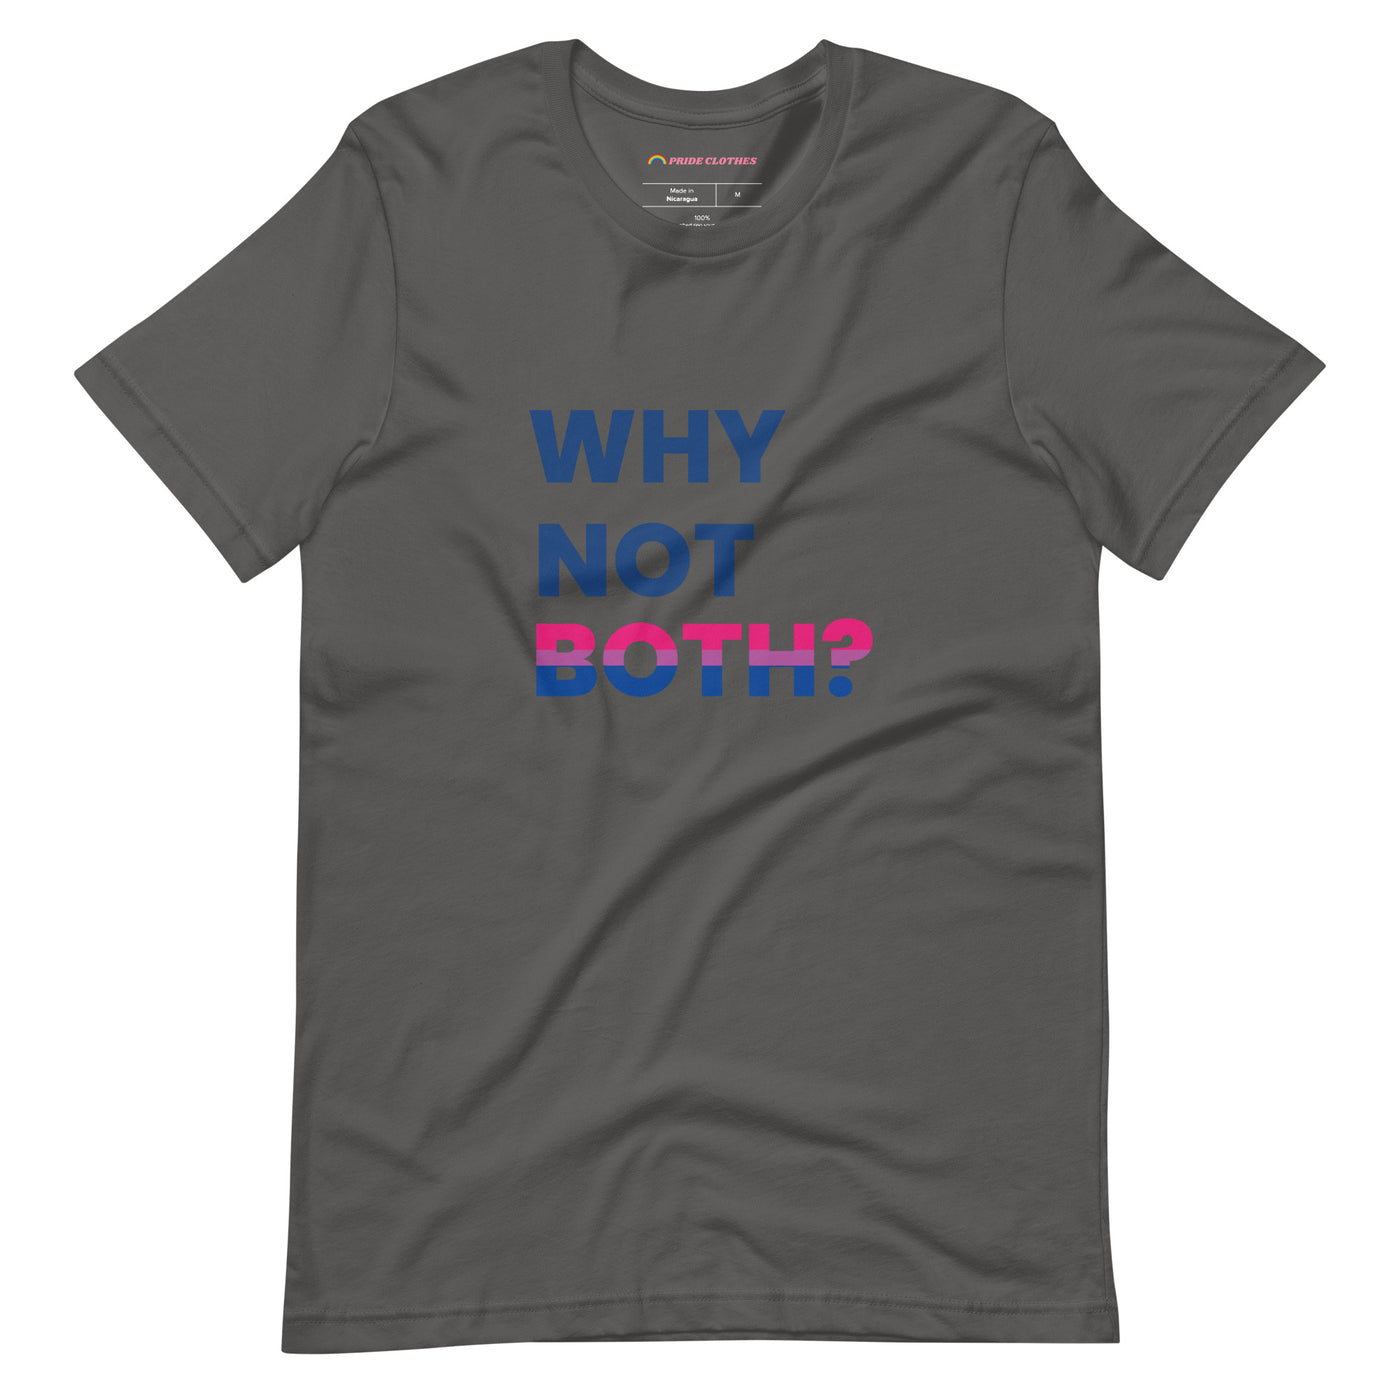 Pride Clothes - Why Limit Yourself to One Why Not Both BI Pride T-Shirt - Asphalt